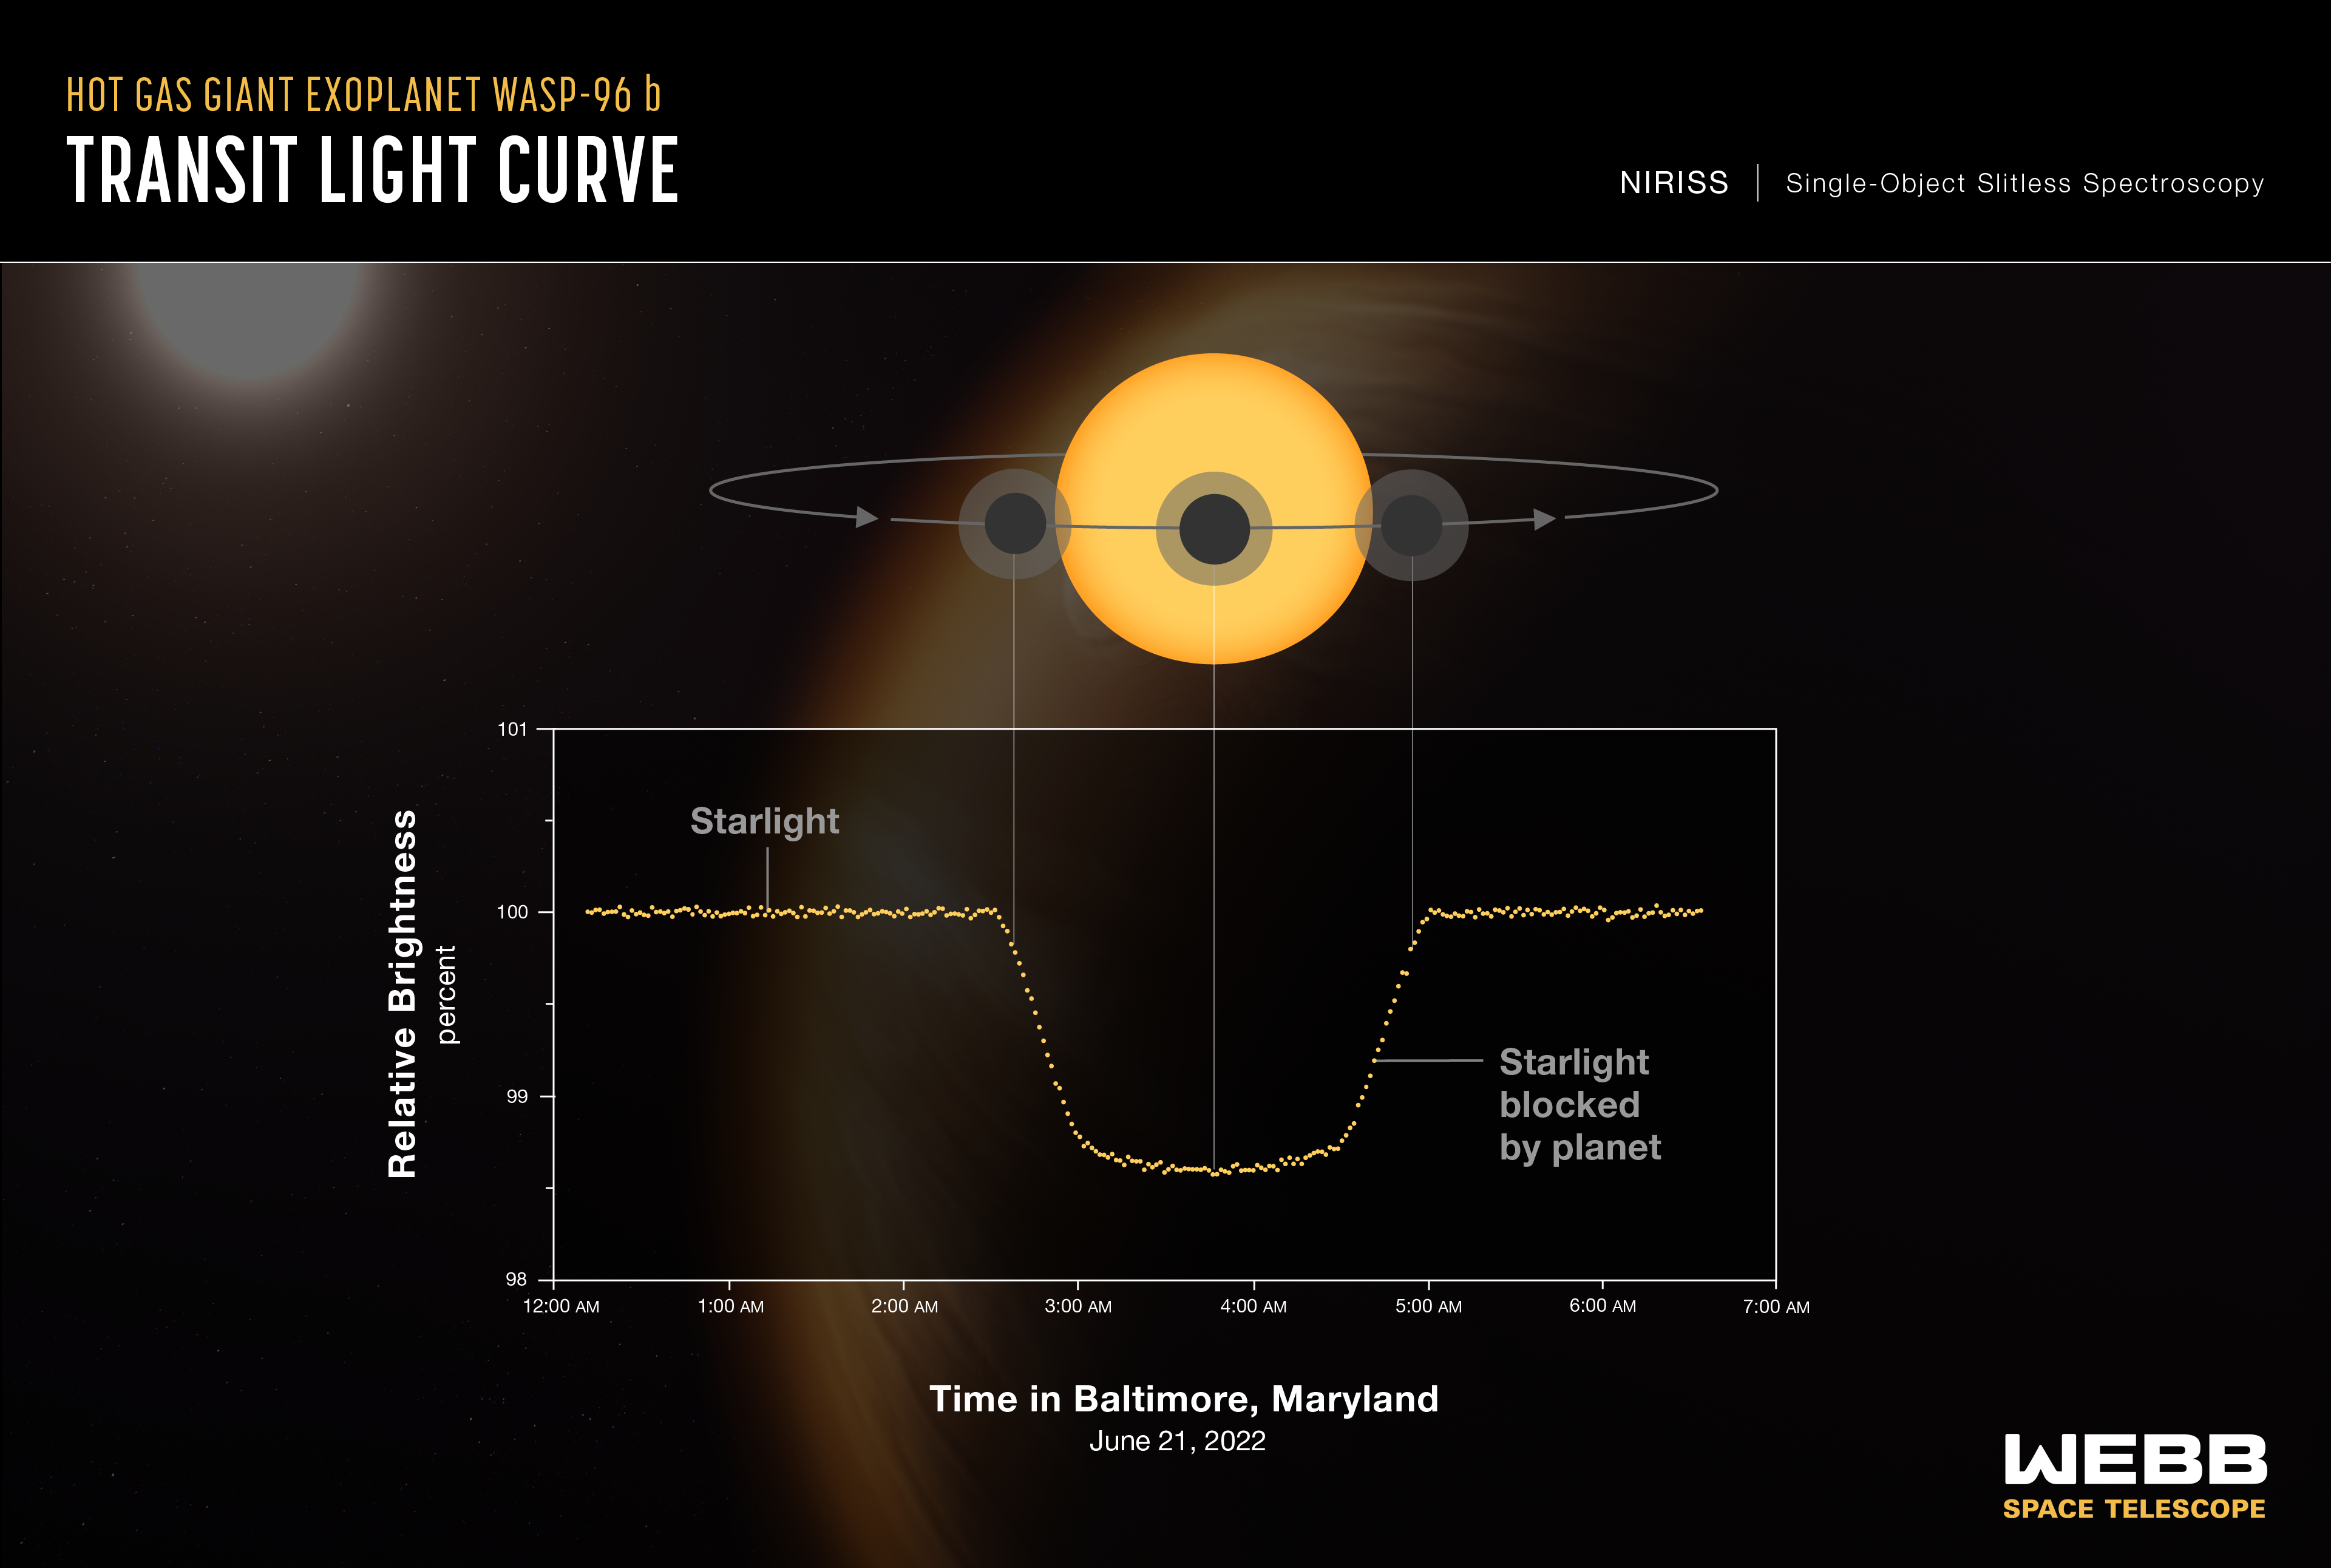 Infographic titled “Hot Gas Giant Exoplanet WASP-96 b Transit Light Curve, NIRISS Single-Object Slitless Spectroscopy.” At the top of the infographic is a diagram showing a planet transiting (moving in front of) its star. Below the diagram is a graph showing the change in relative brightness of the star-planet system between 12:00 a.m. and 7:00 a.m. in Baltimore, Maryland, on June 21, 2022. The diagram and graph are aligned vertically to show the relationship between the geometry of the star-planet system as the planet orbits, and the measurements on the graph. The infographic shows that the brightness of the system remains steady until the planet begins to transit the star. It then decreases until the planet is directly in front of the star. The brightness increases again until the planet is no longer blocking the star, at which point it levels out.